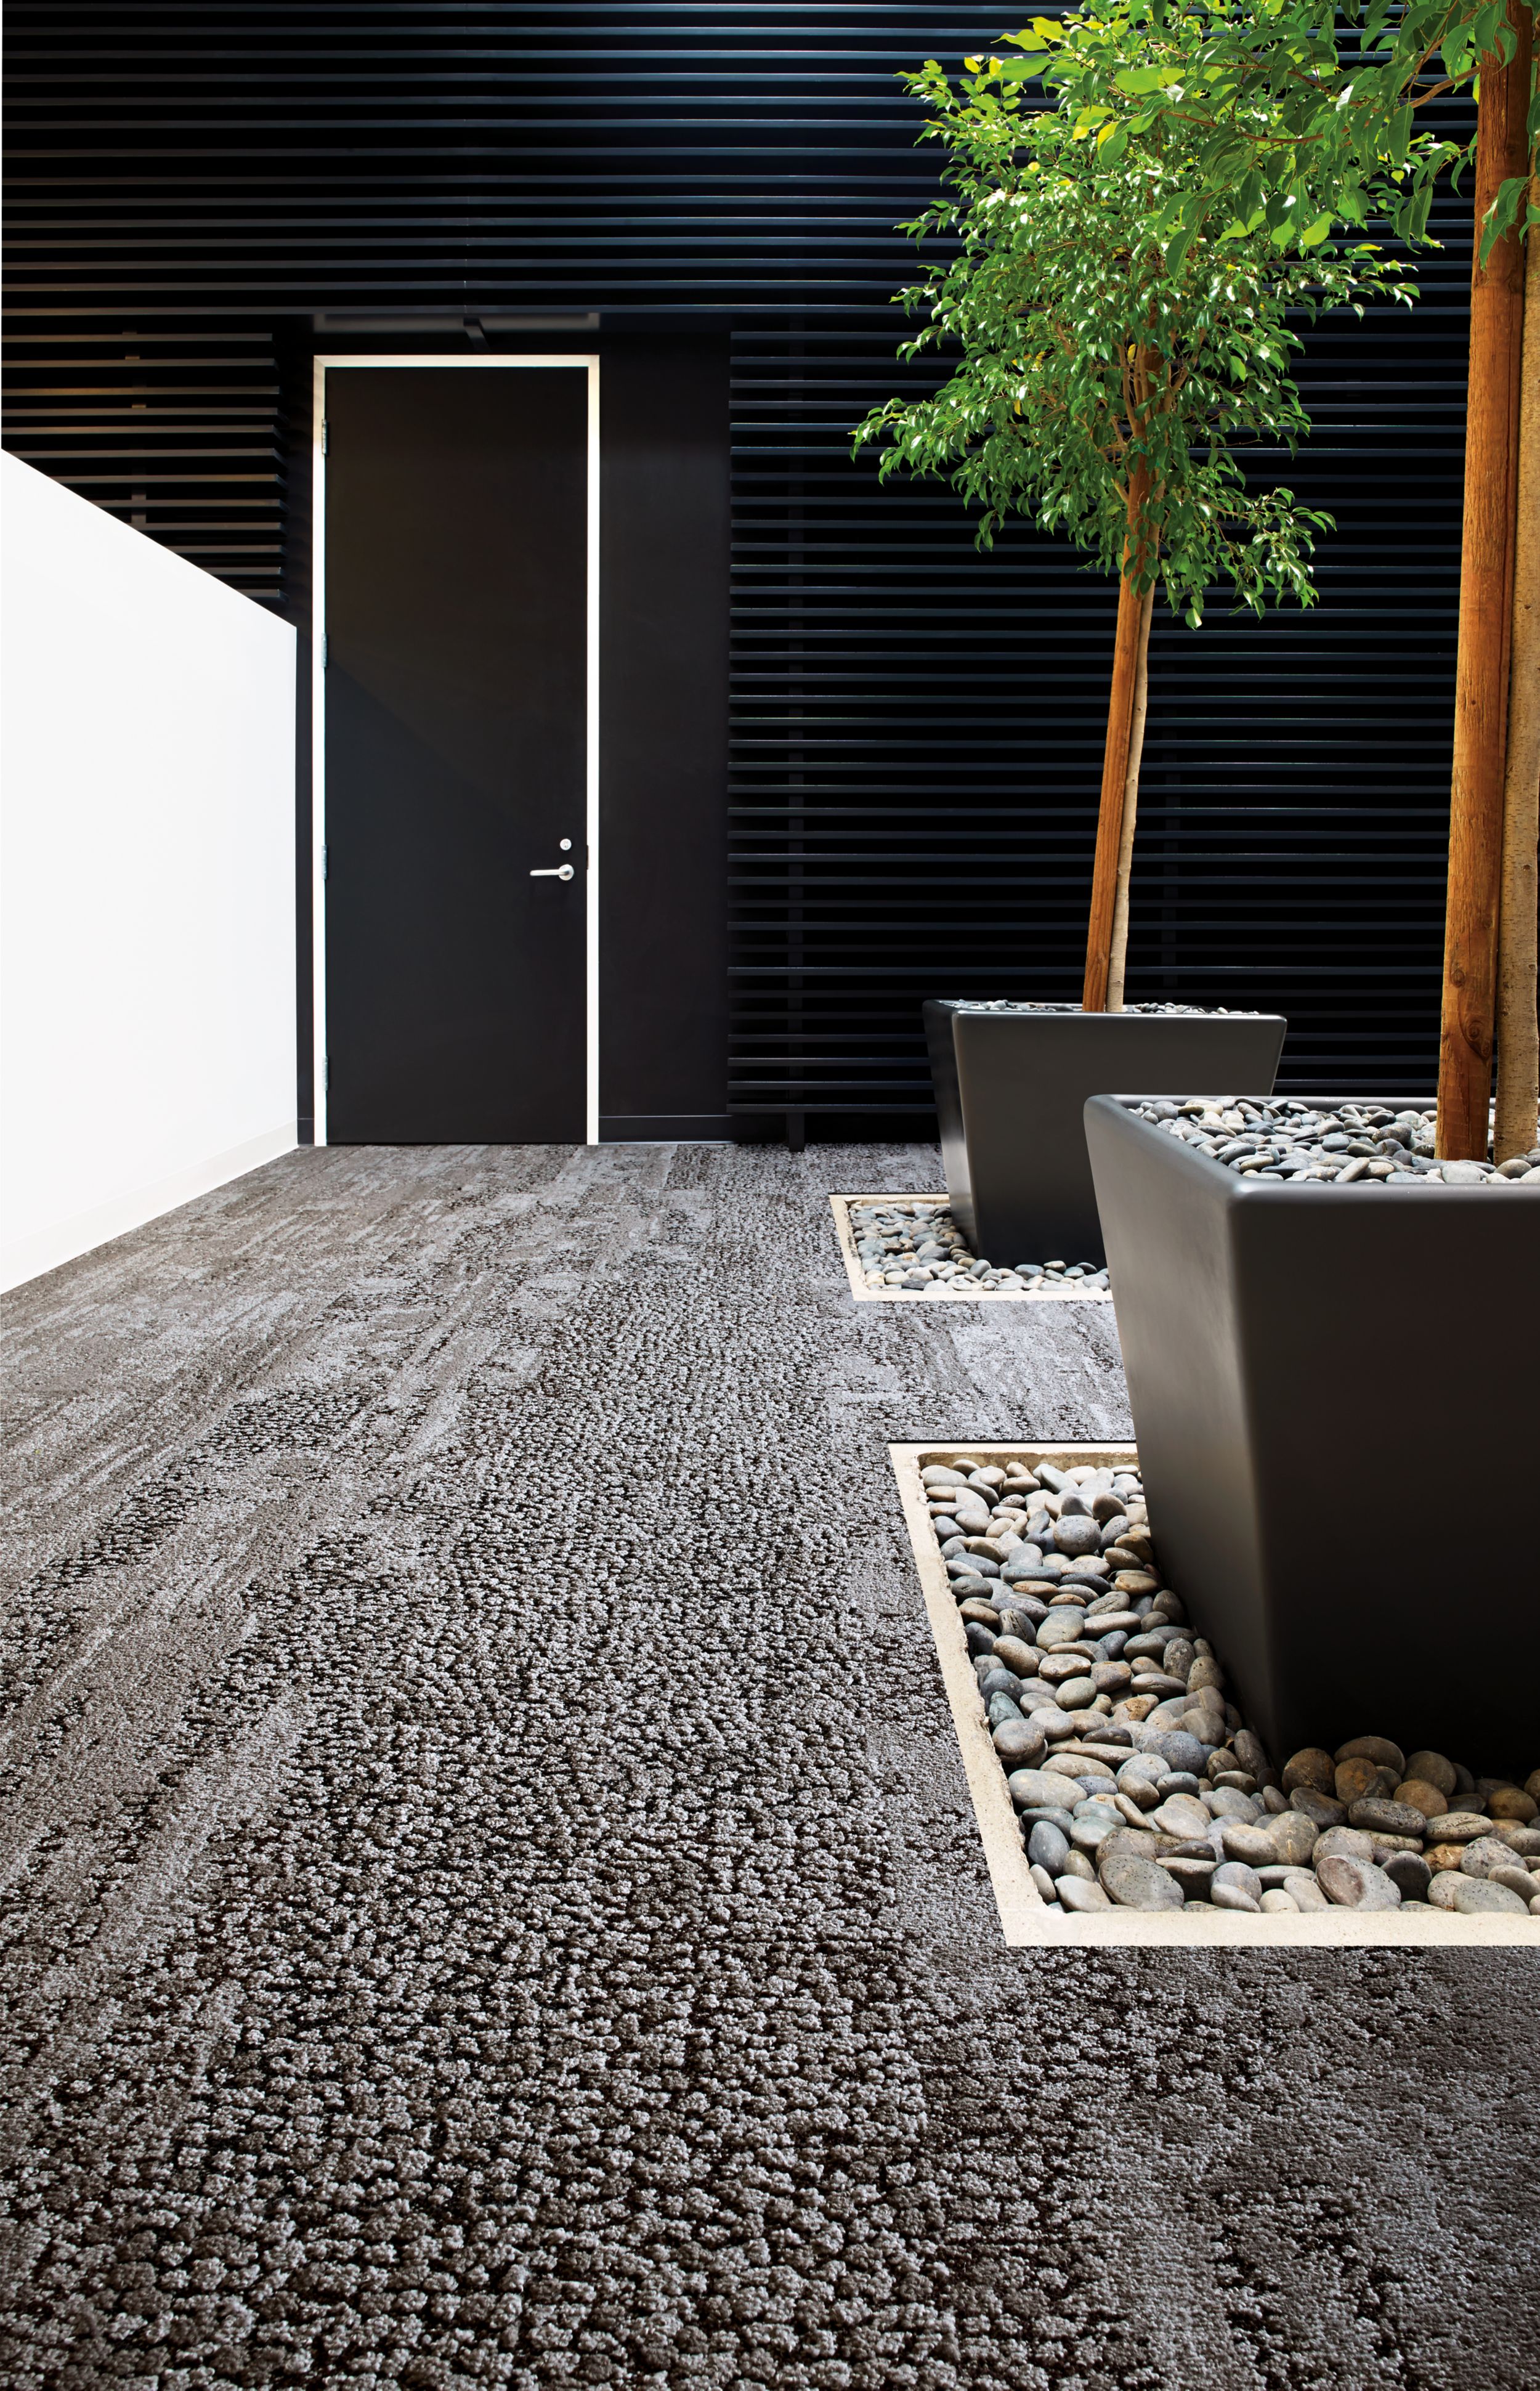 image Interface HN810, HN820, HN840 and HN850 plank carpet tiles in white anc black room with potted trees and river rock numéro 8